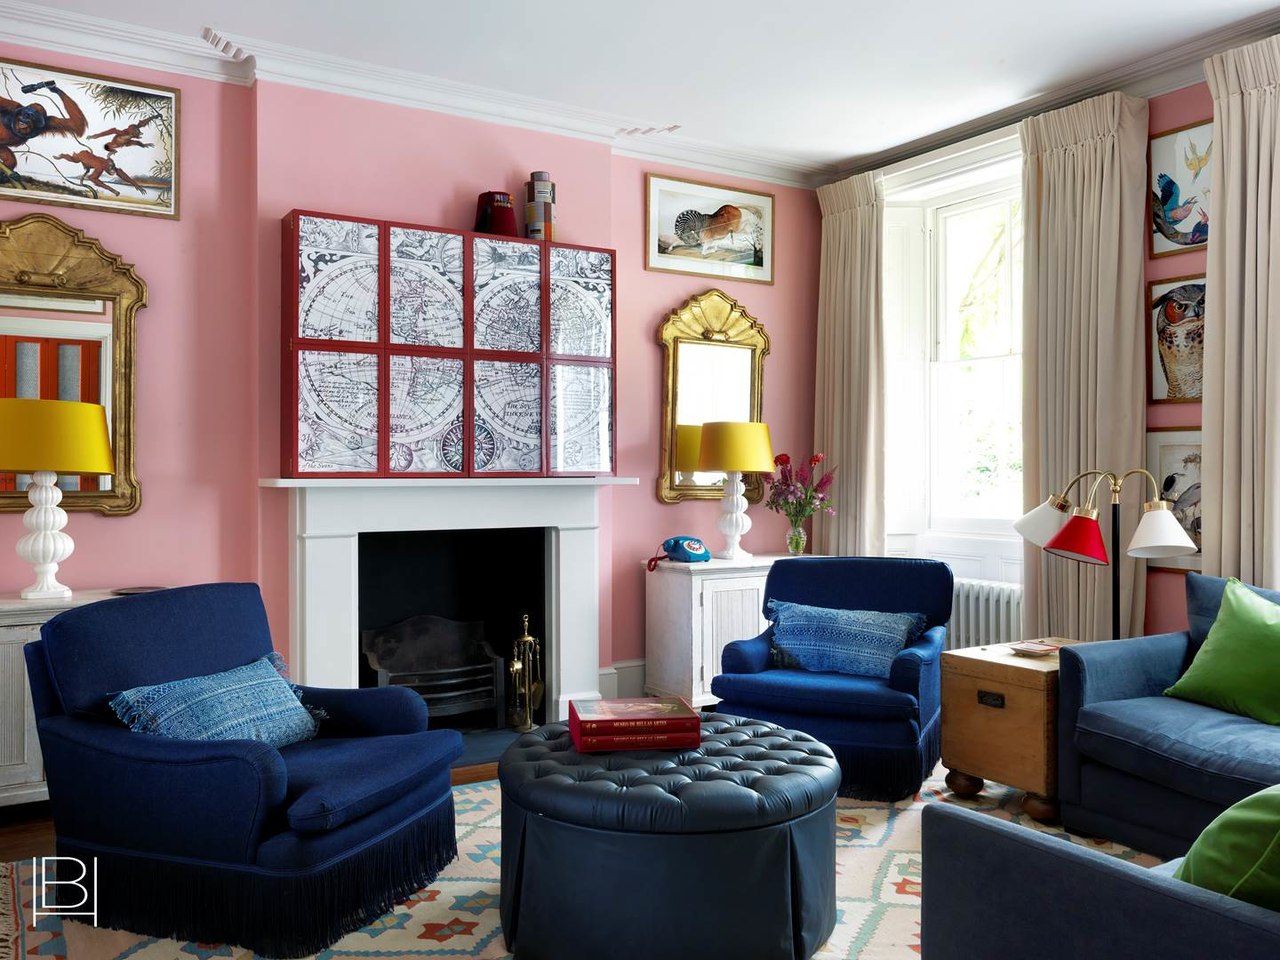 Discover These Inspiring Interior Design Projects by Beata Heuman West London housetown